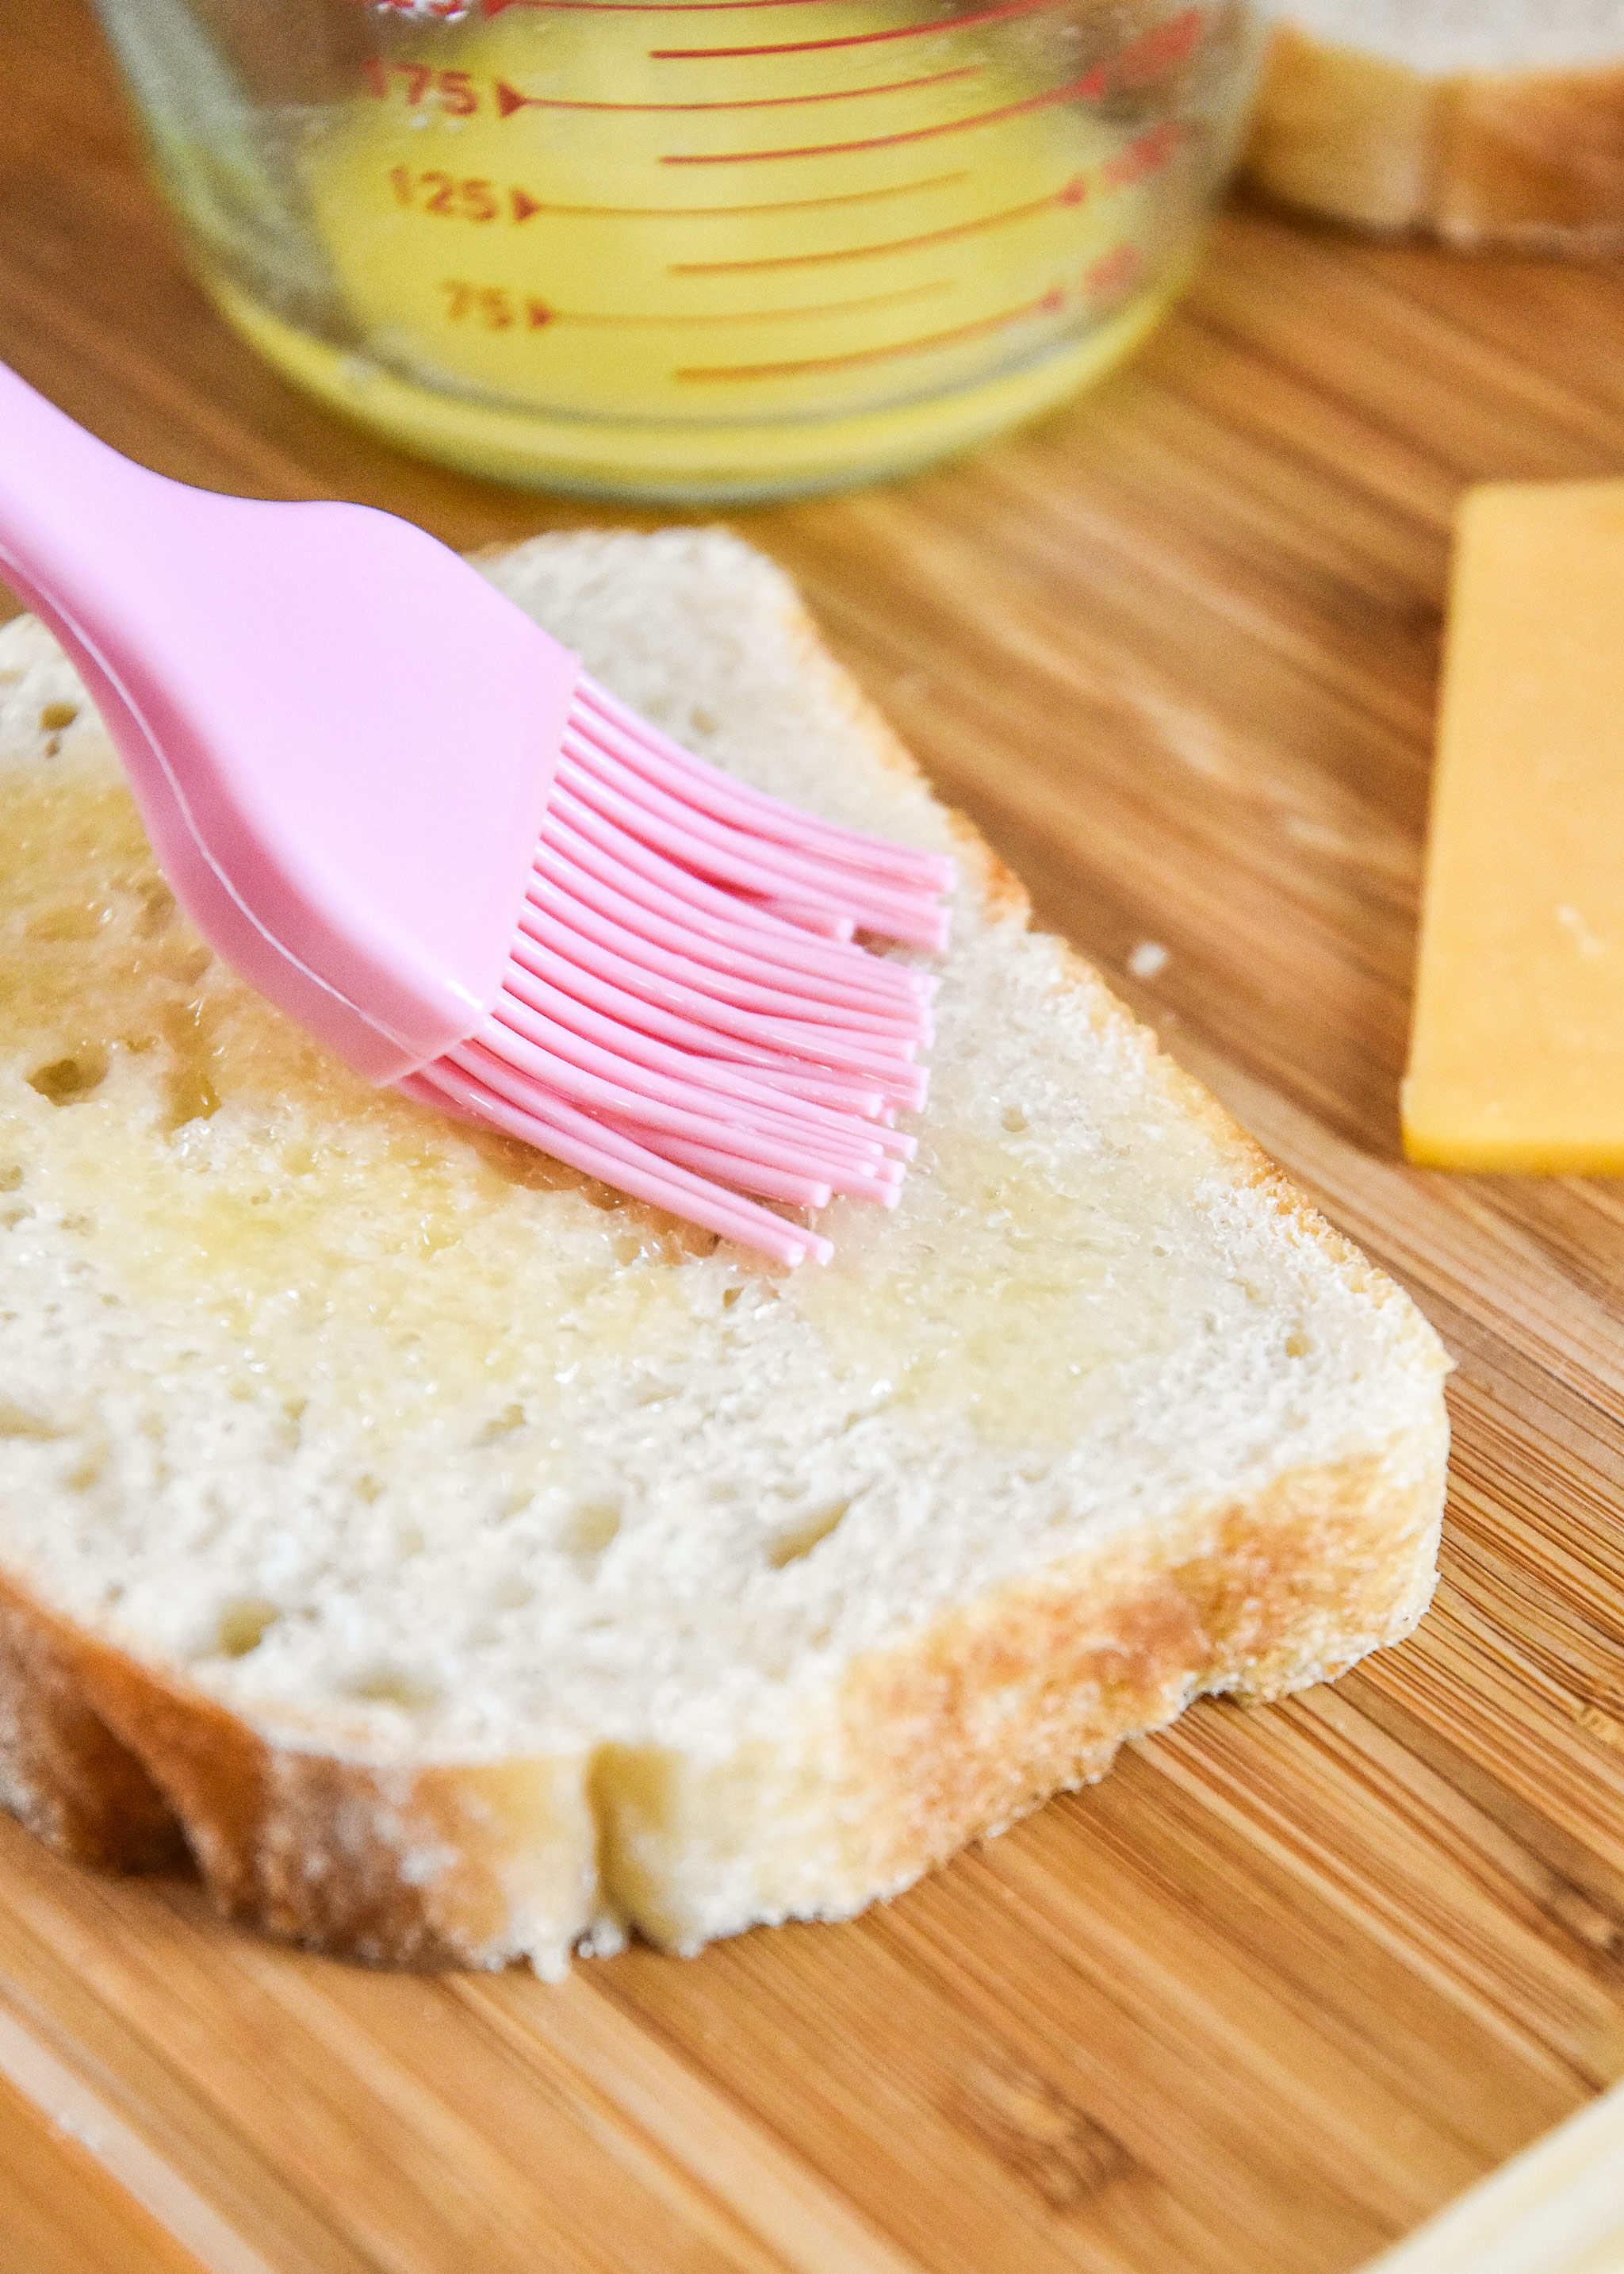 brushing butter on bread to make a grilled cheese sandwich